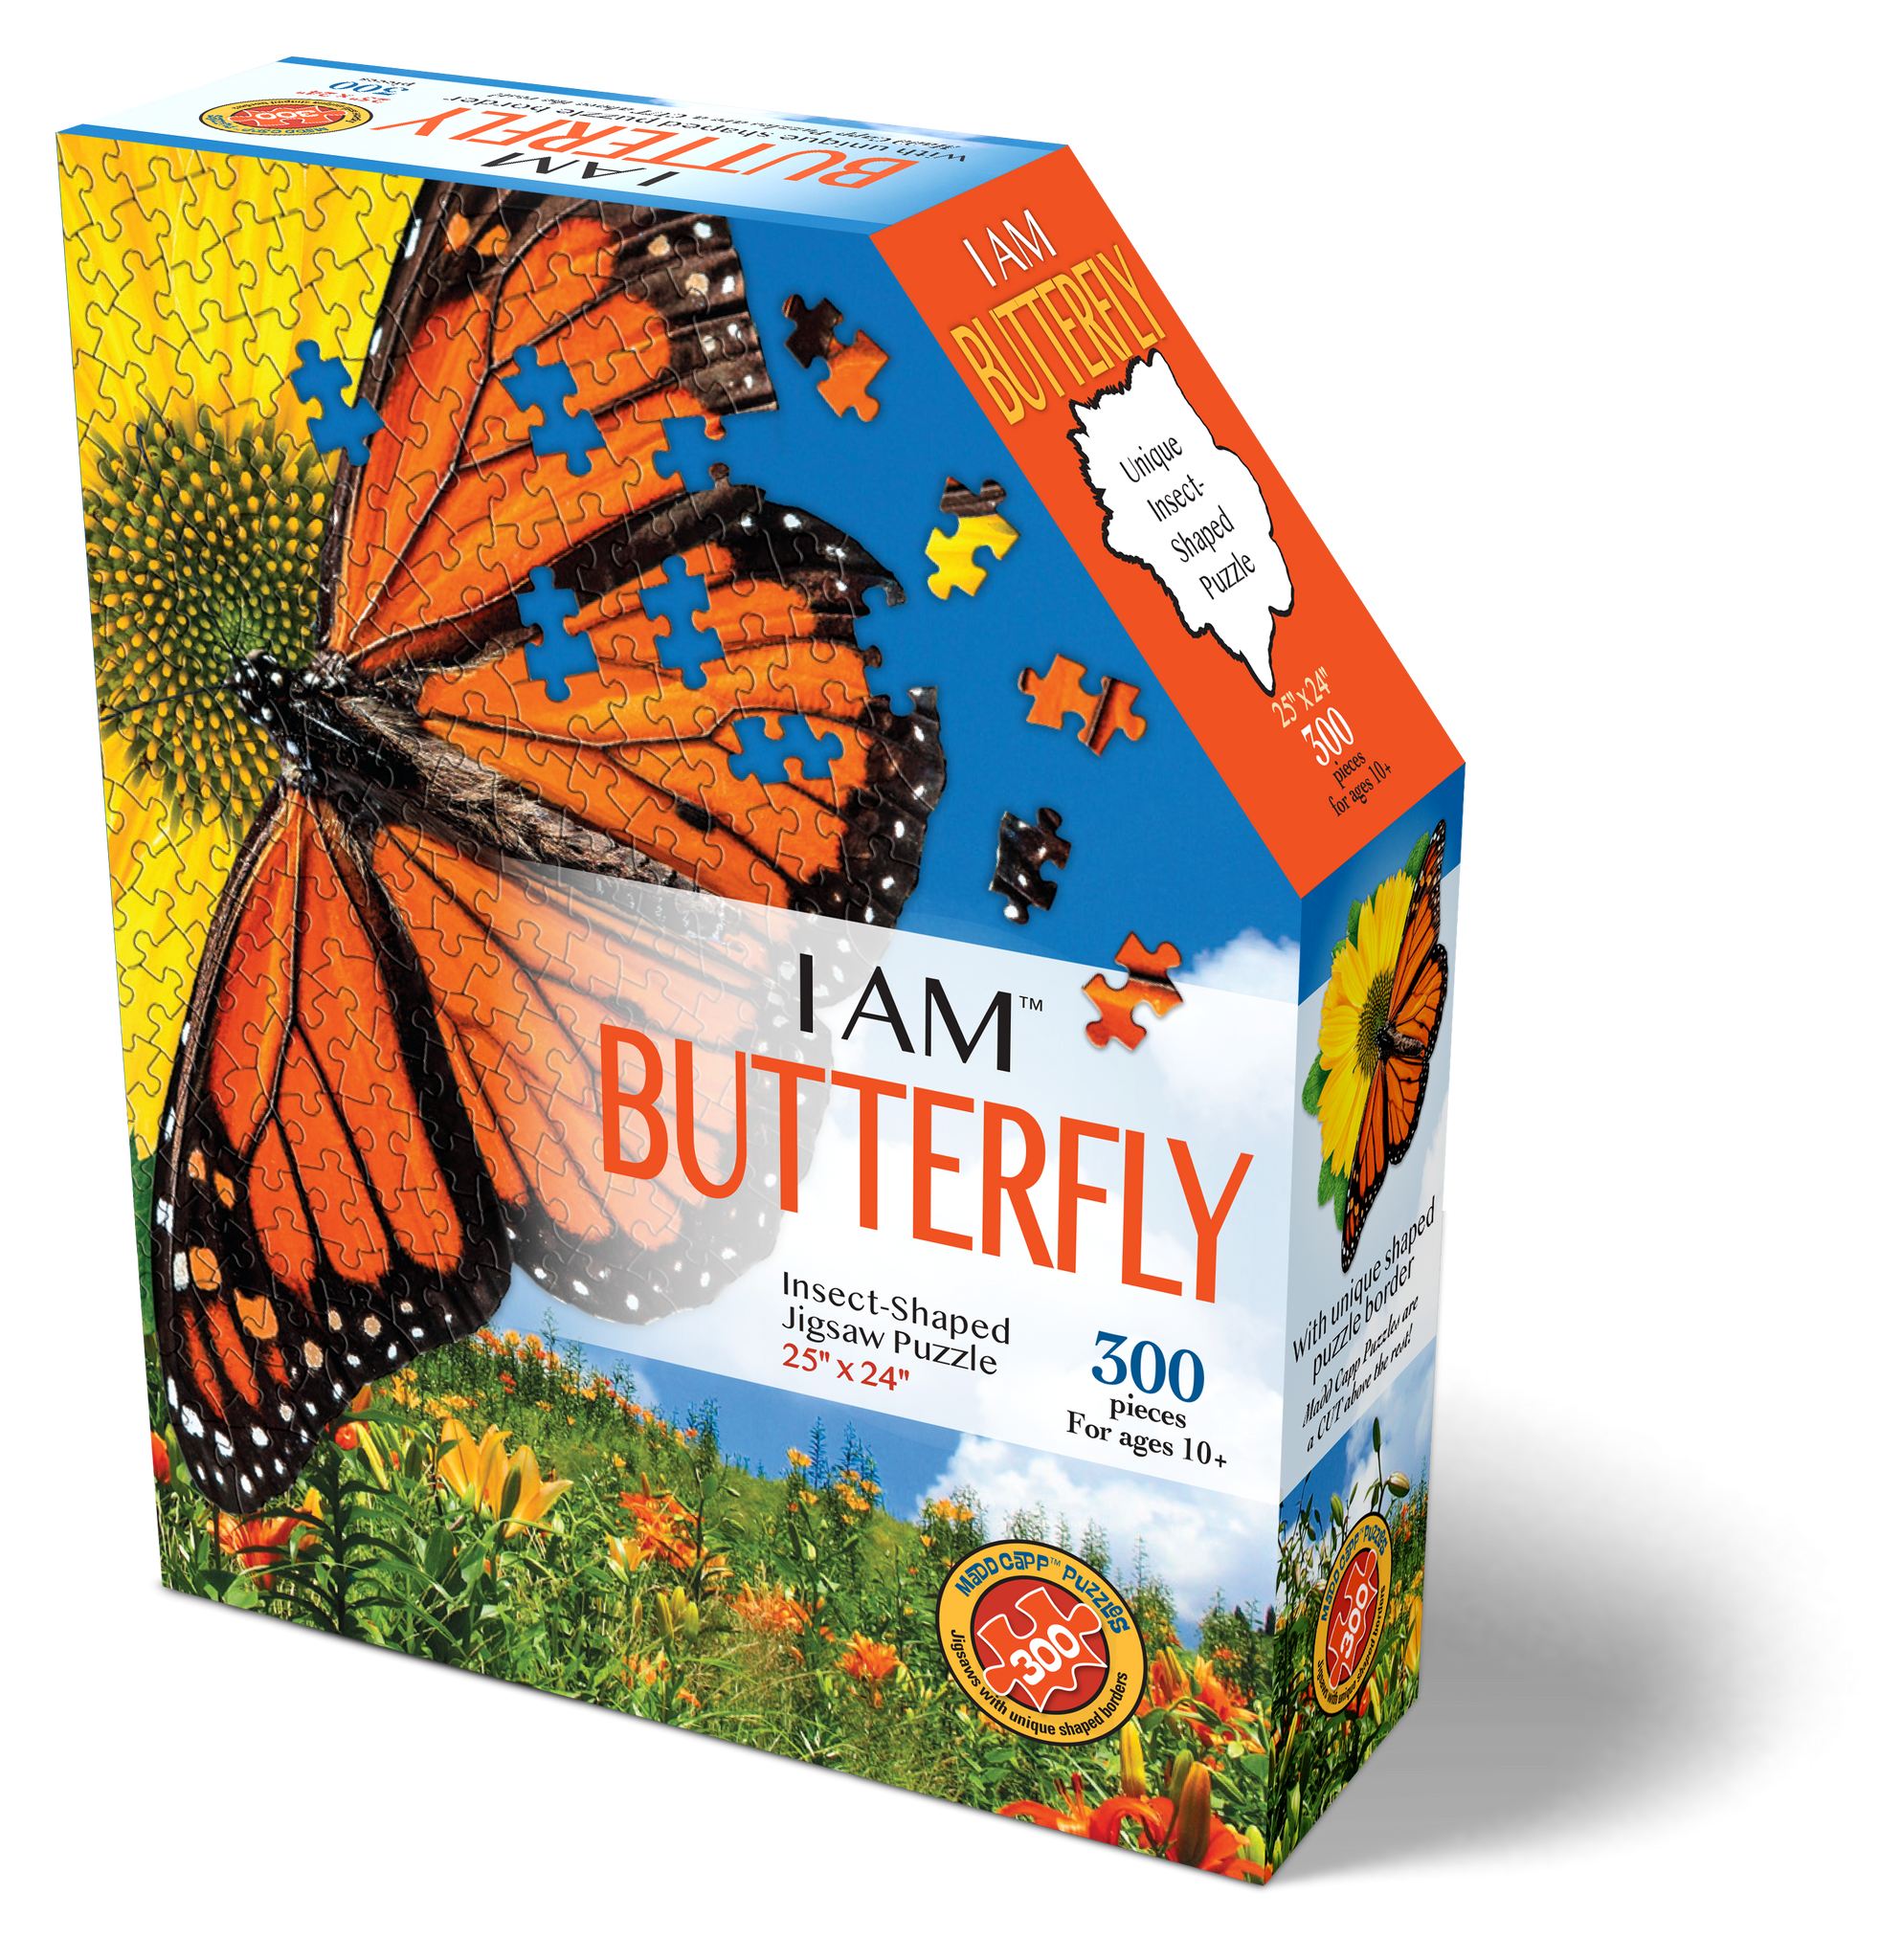 I AM BUTTERFLY 300 PIECE PUZZLE